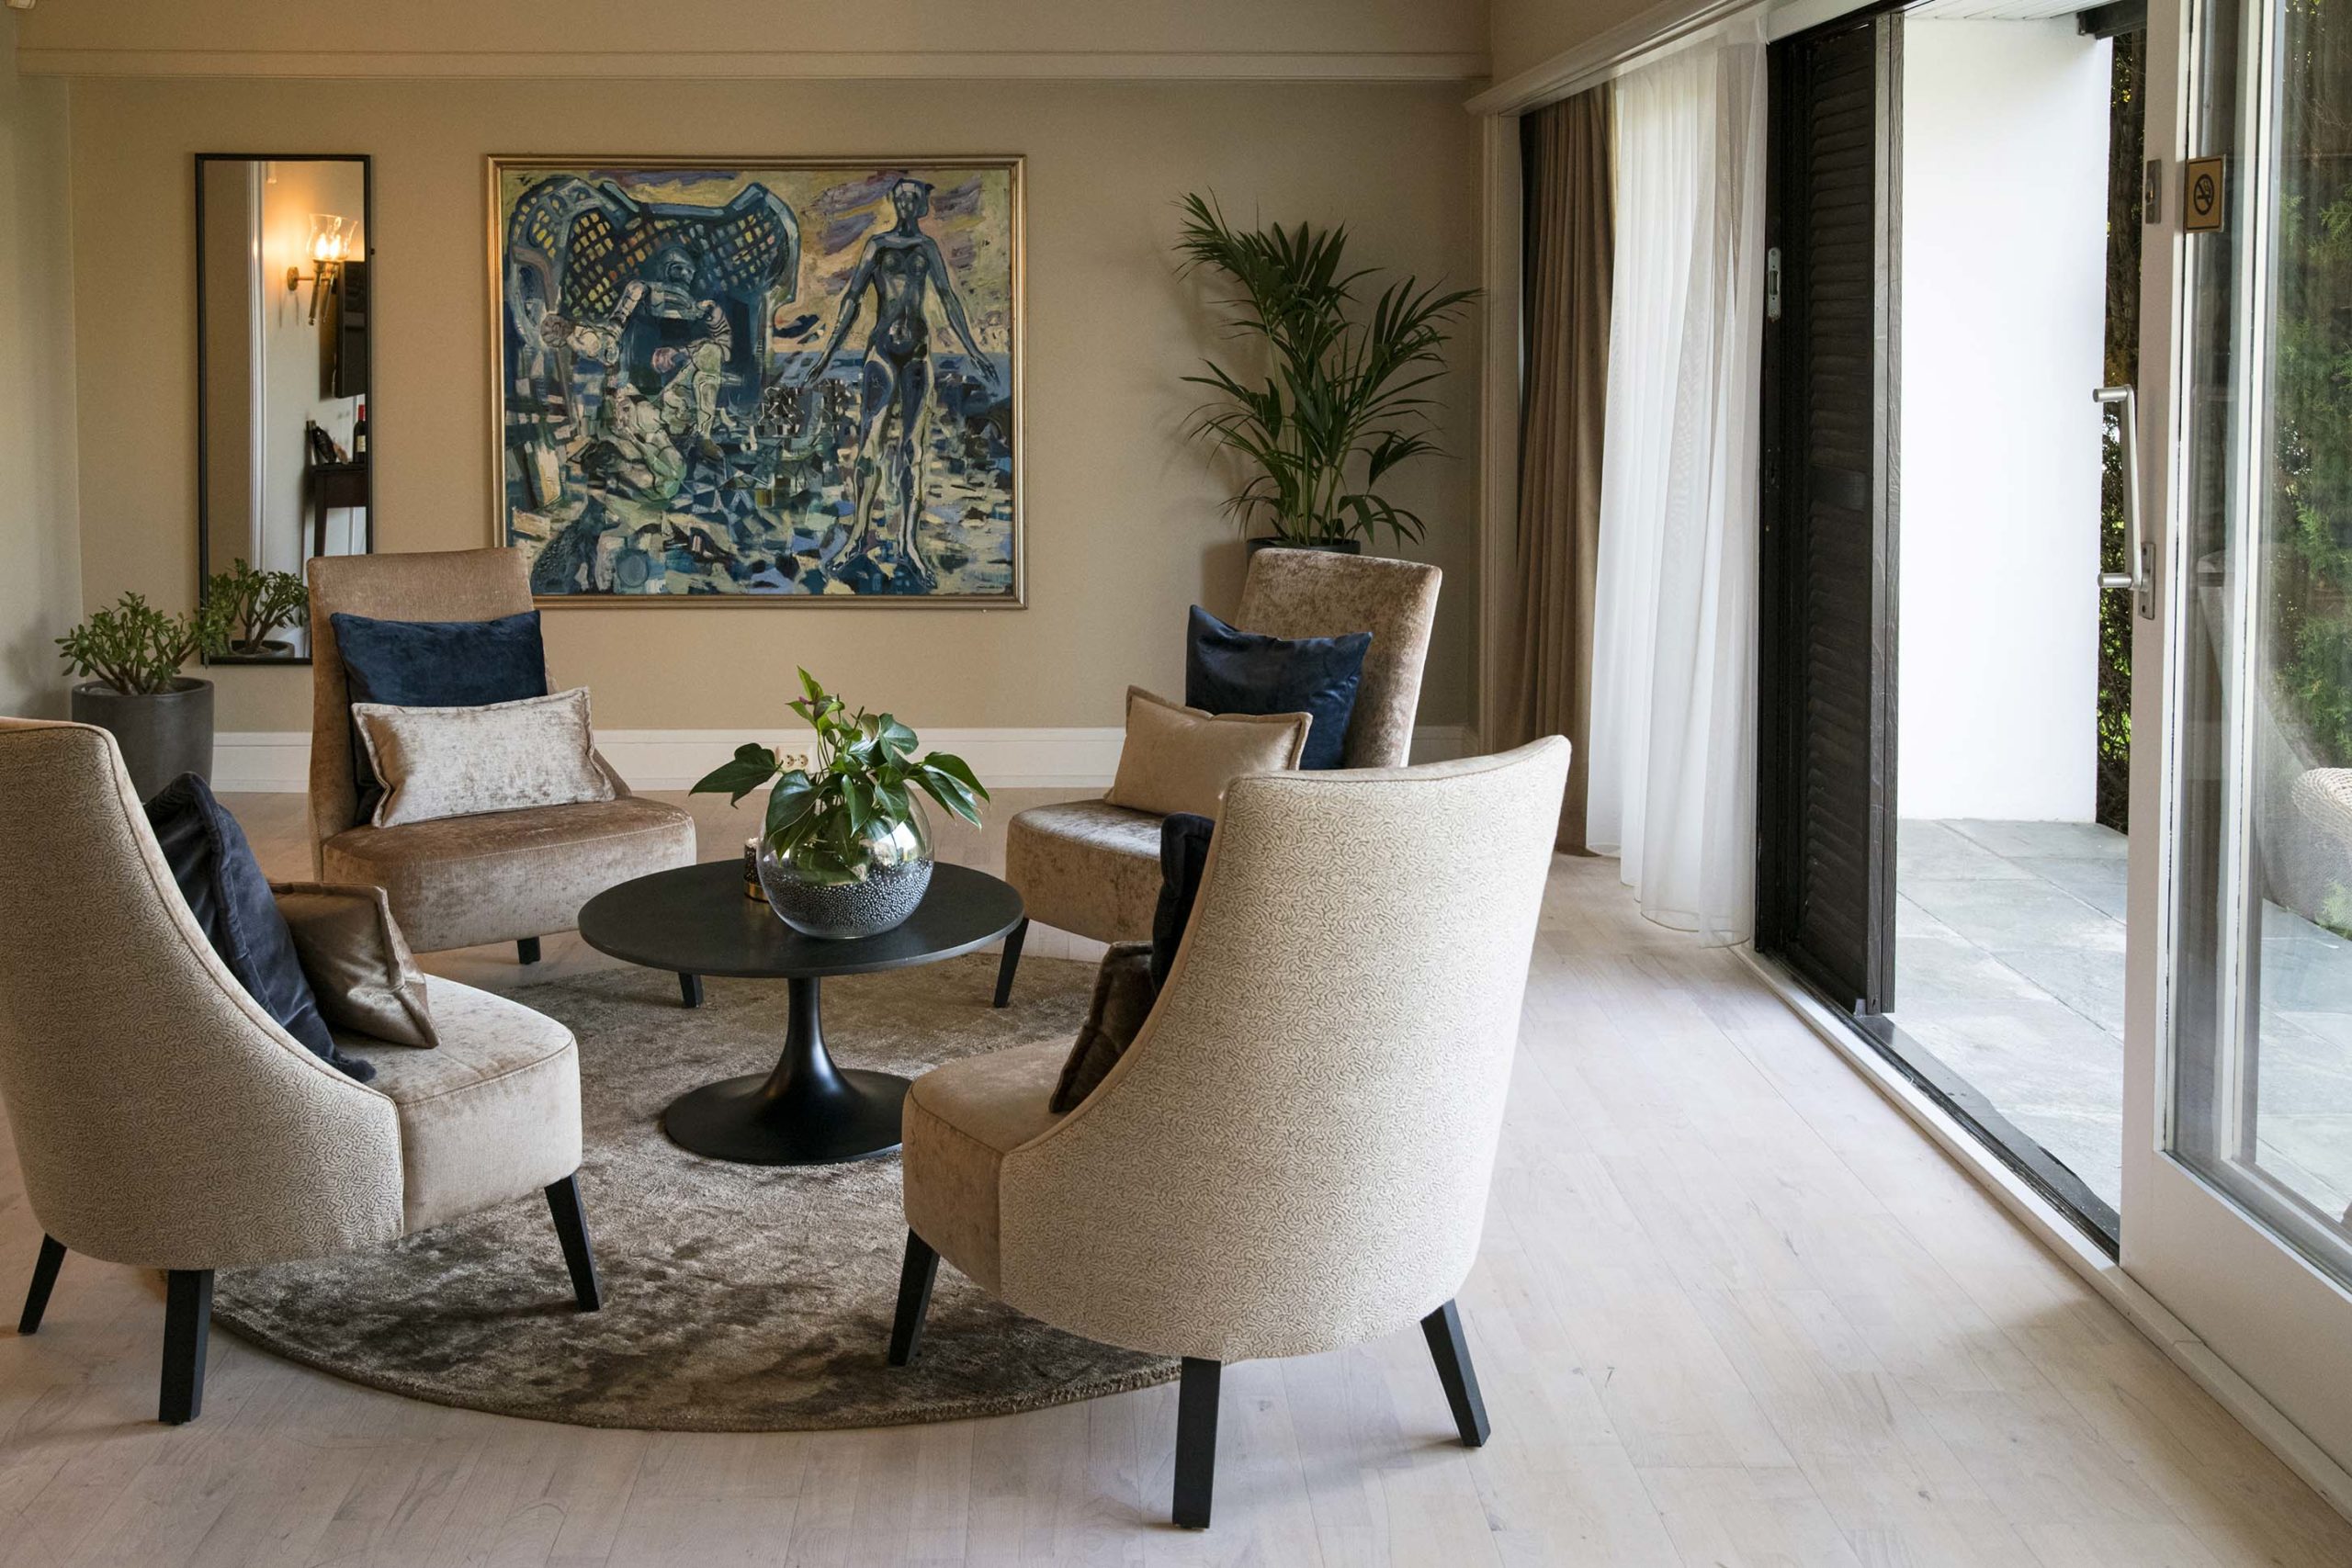 The suite - seating area. Photo: Thorsland